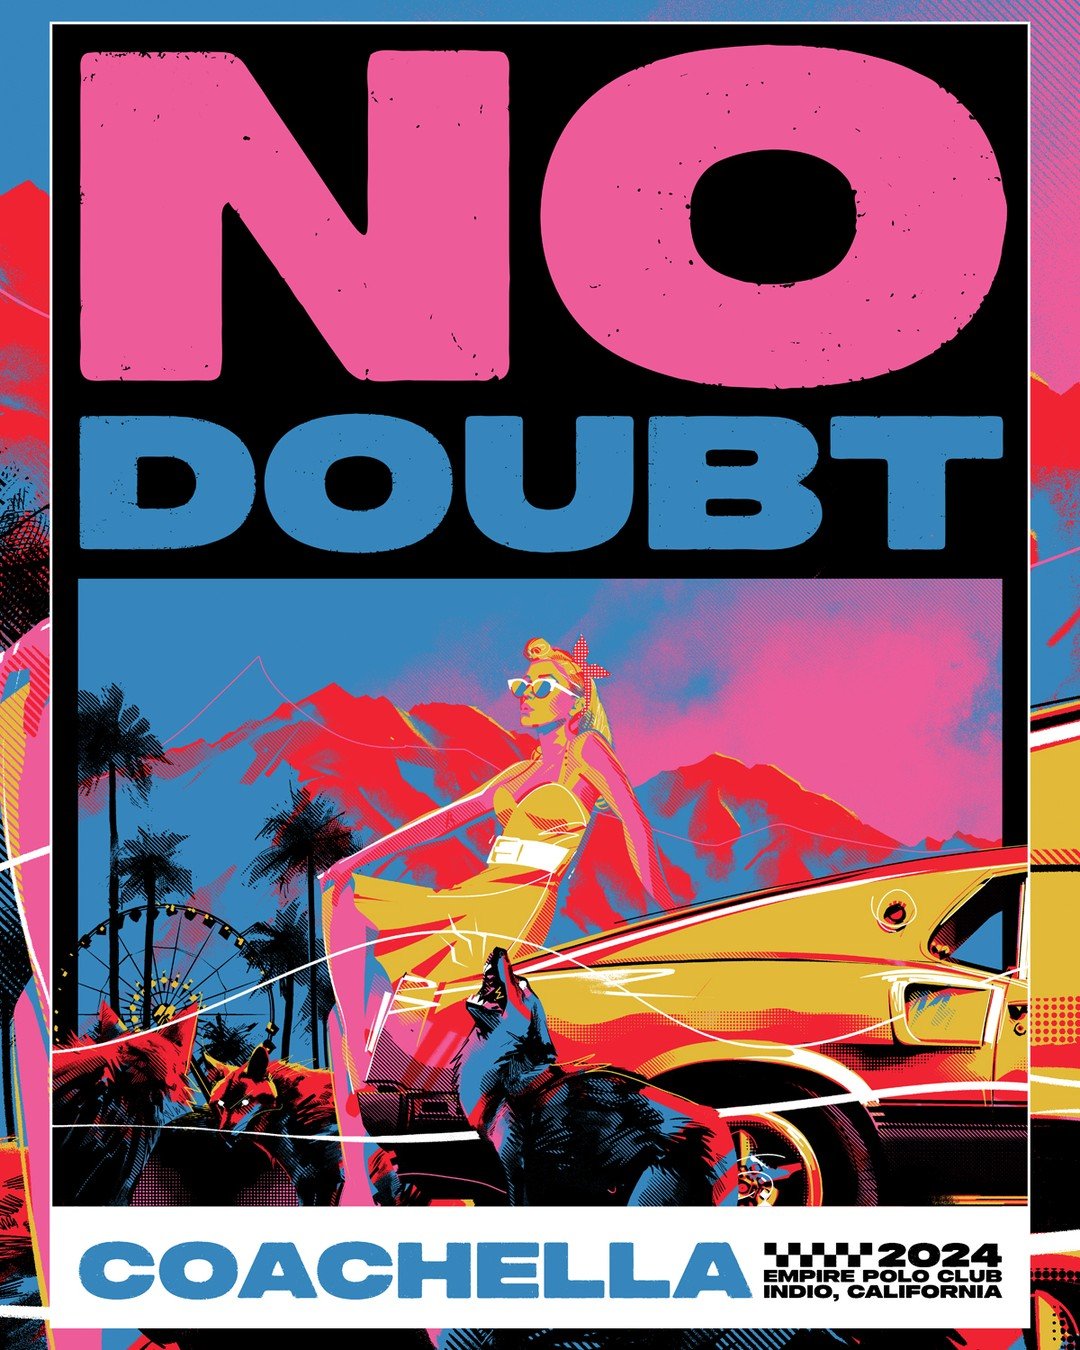 It's @coachella weekend! Well the first of two Coachella weekends if you want to split hairs about it. 

Obviously the big news of the festival is that @nodoubt are reforming to play their first shows since 2015 and I was asked by @collectionzz if I 